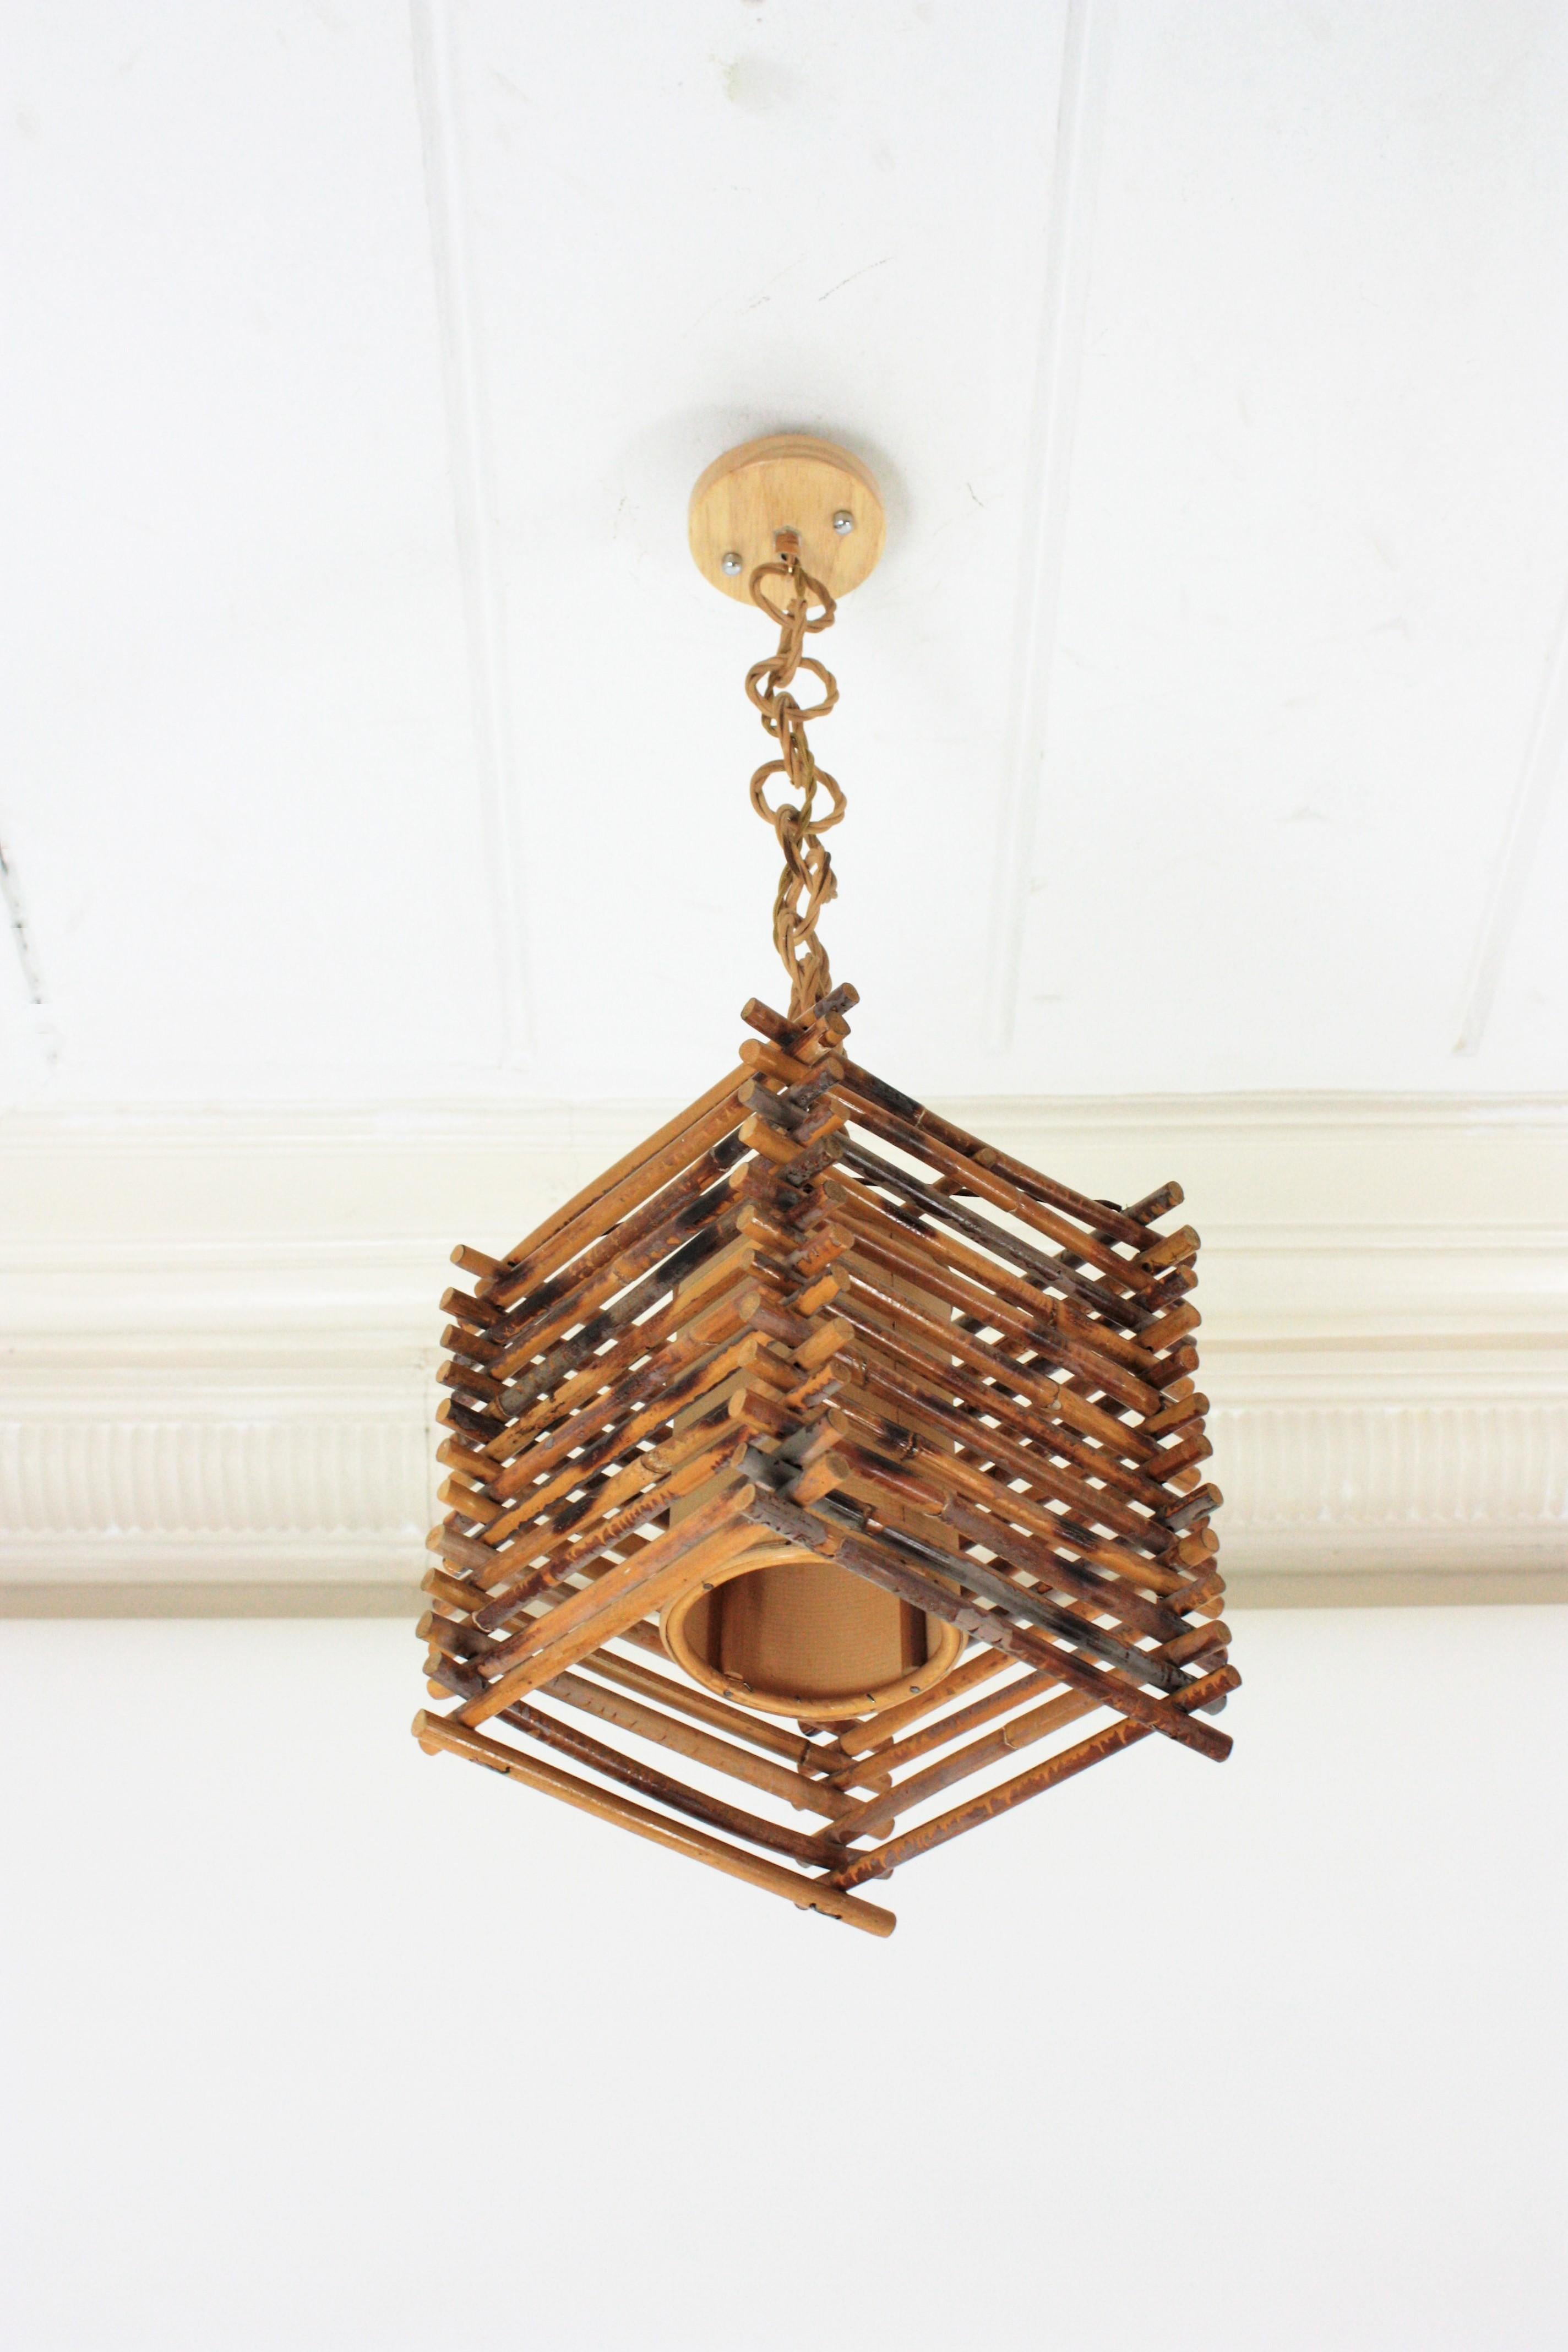 French Rattan Lantern Pendant with Chinoiserie Accents For Sale 4